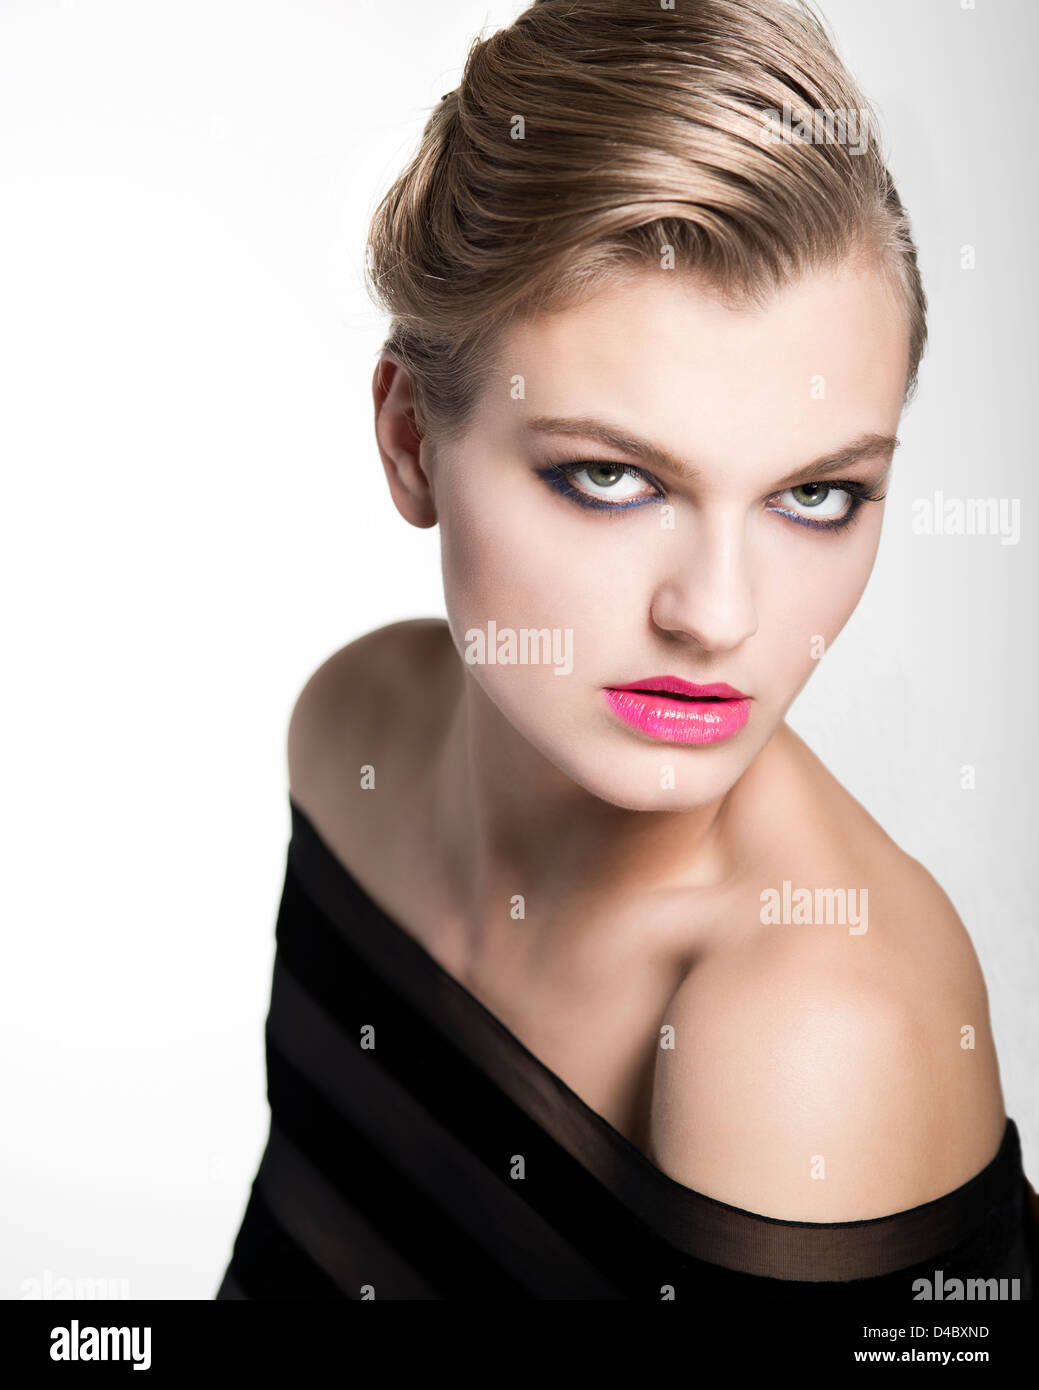 Beauty portrait of a young woman with blond hair and pink lipstick Stock Photo